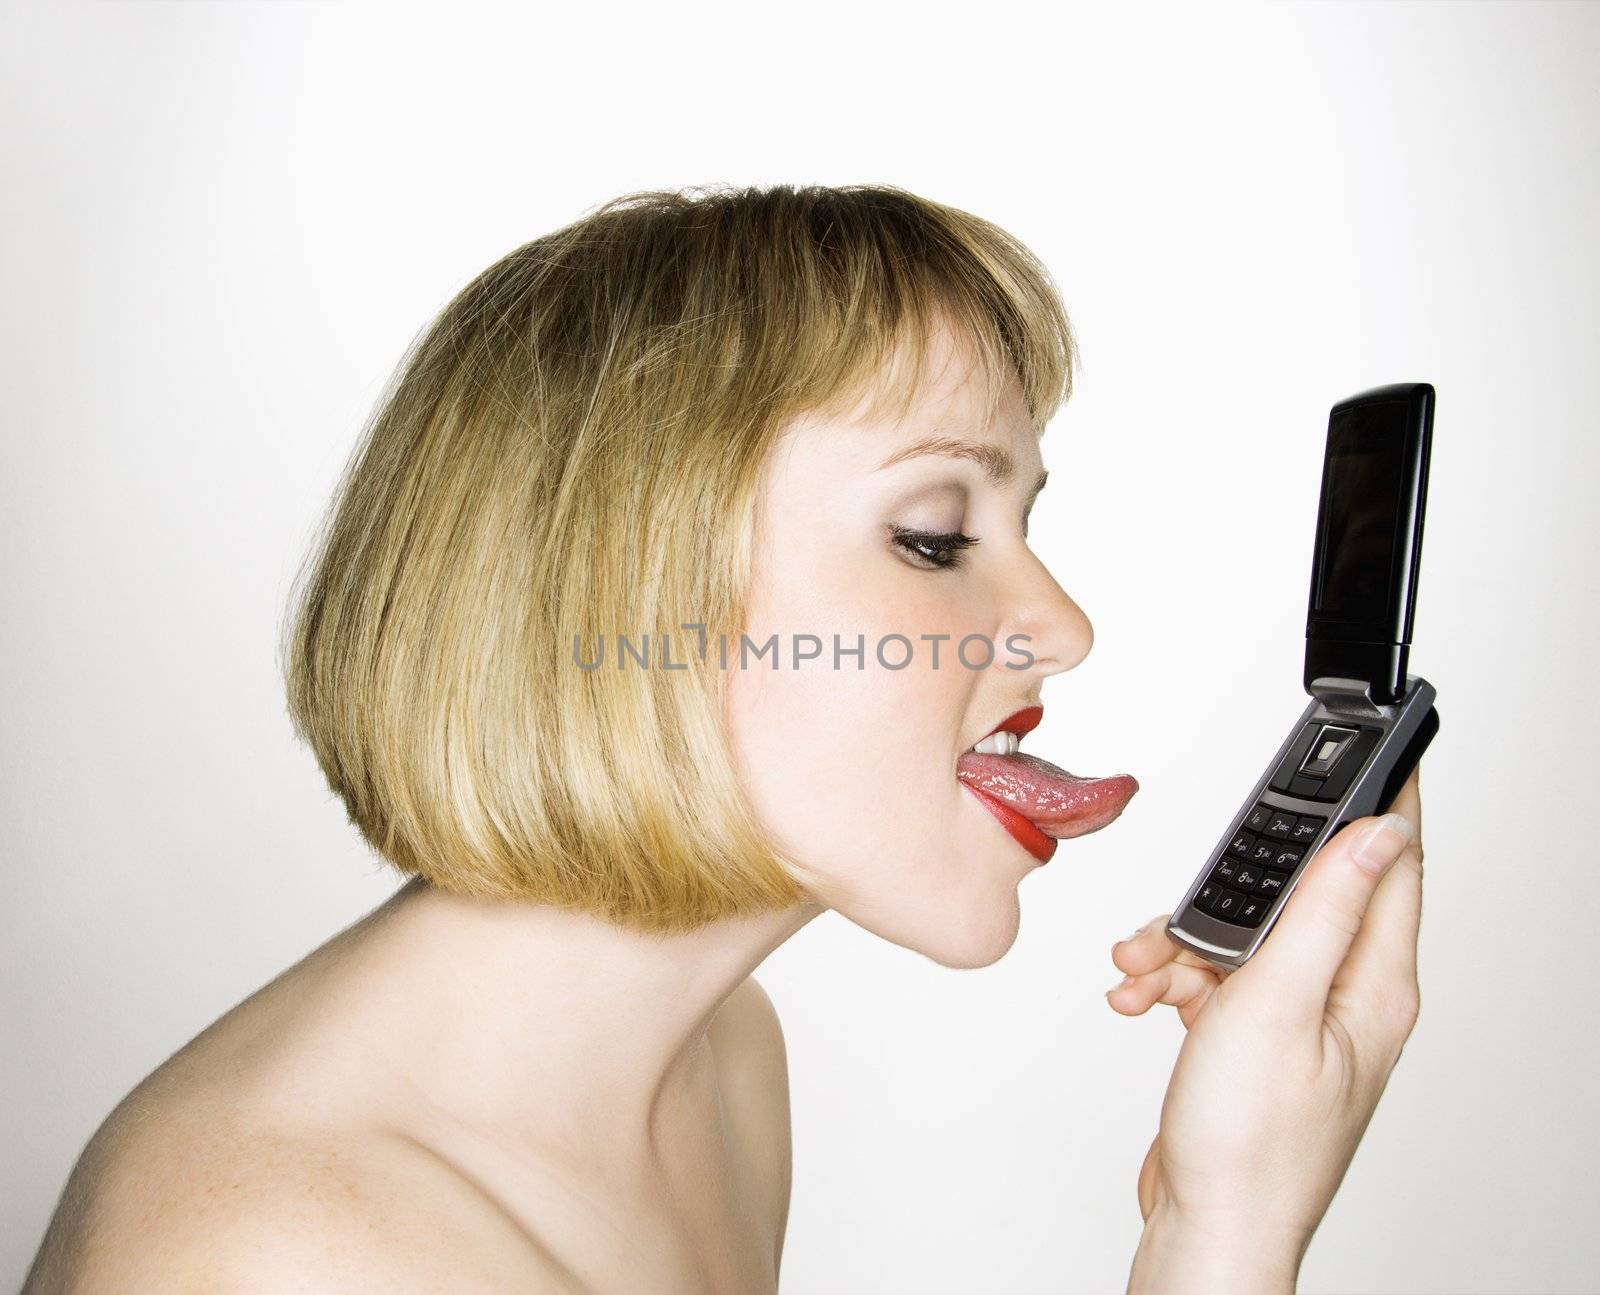 Woman licking phone. by iofoto